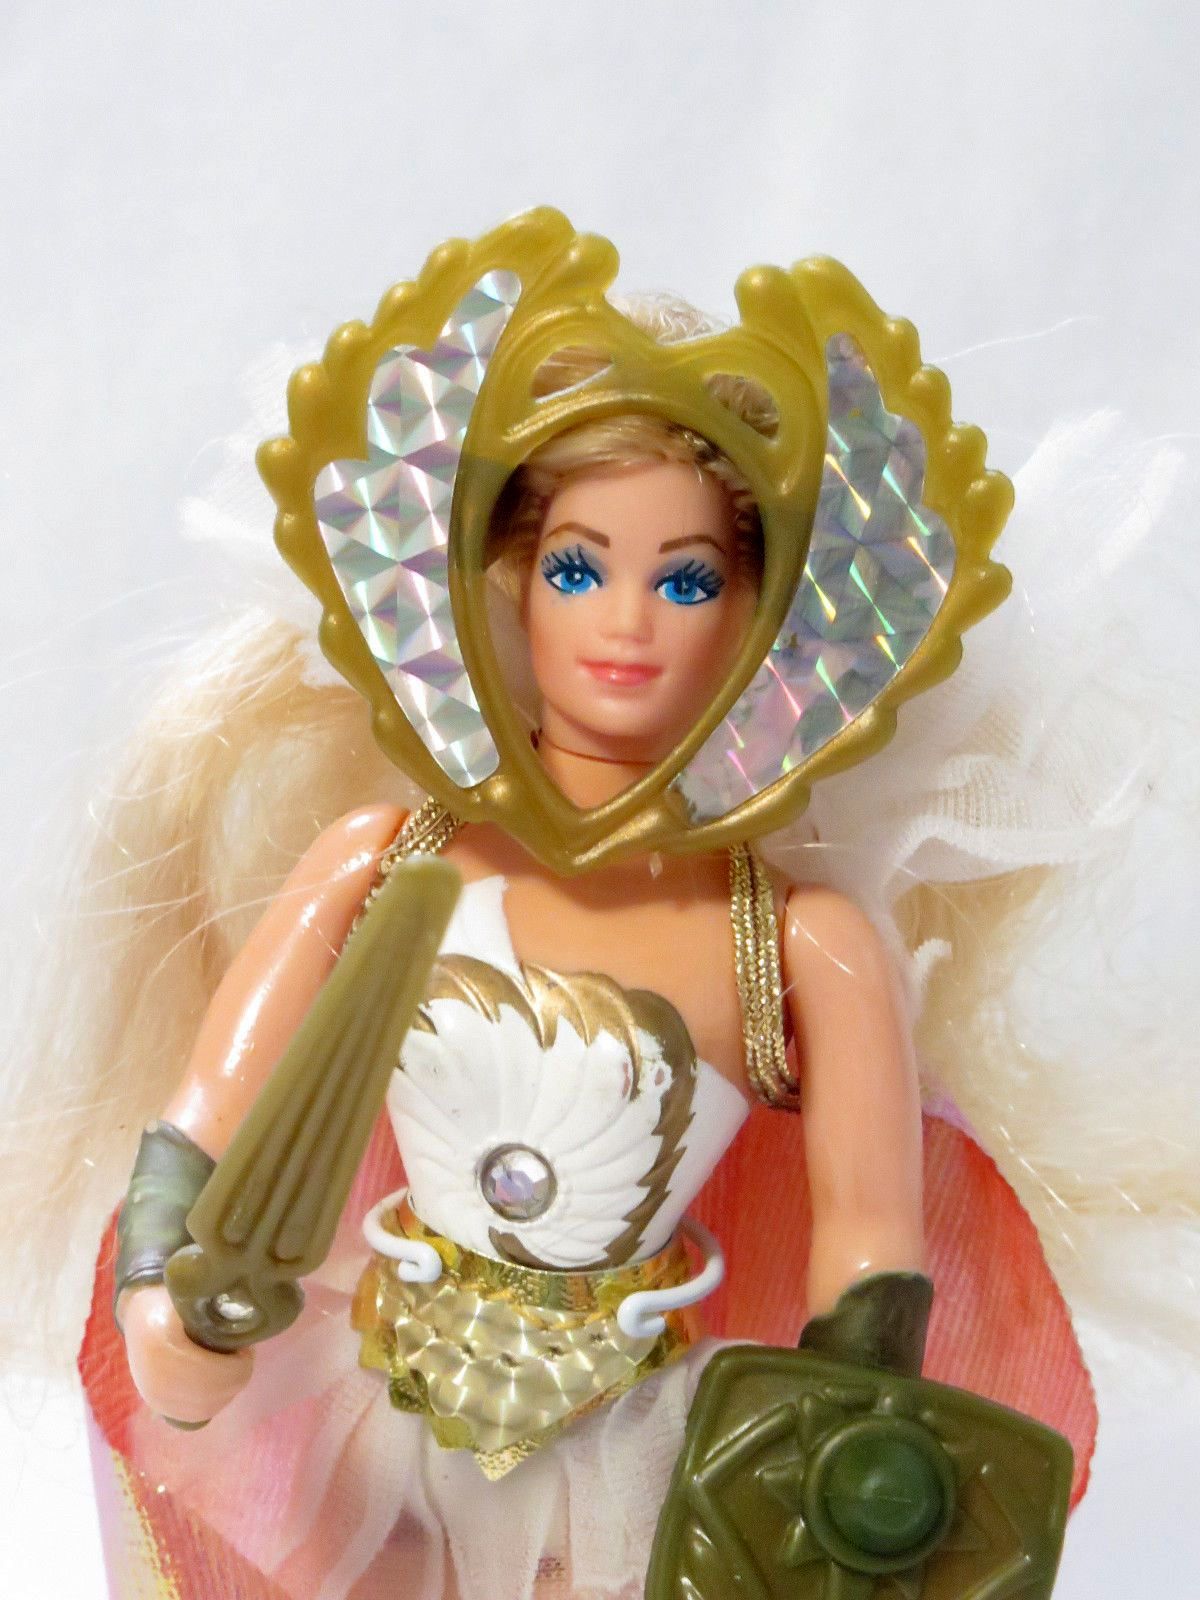 She-Ra: Princess of Power (1985) - (figures, dolls, toys and objects) 1